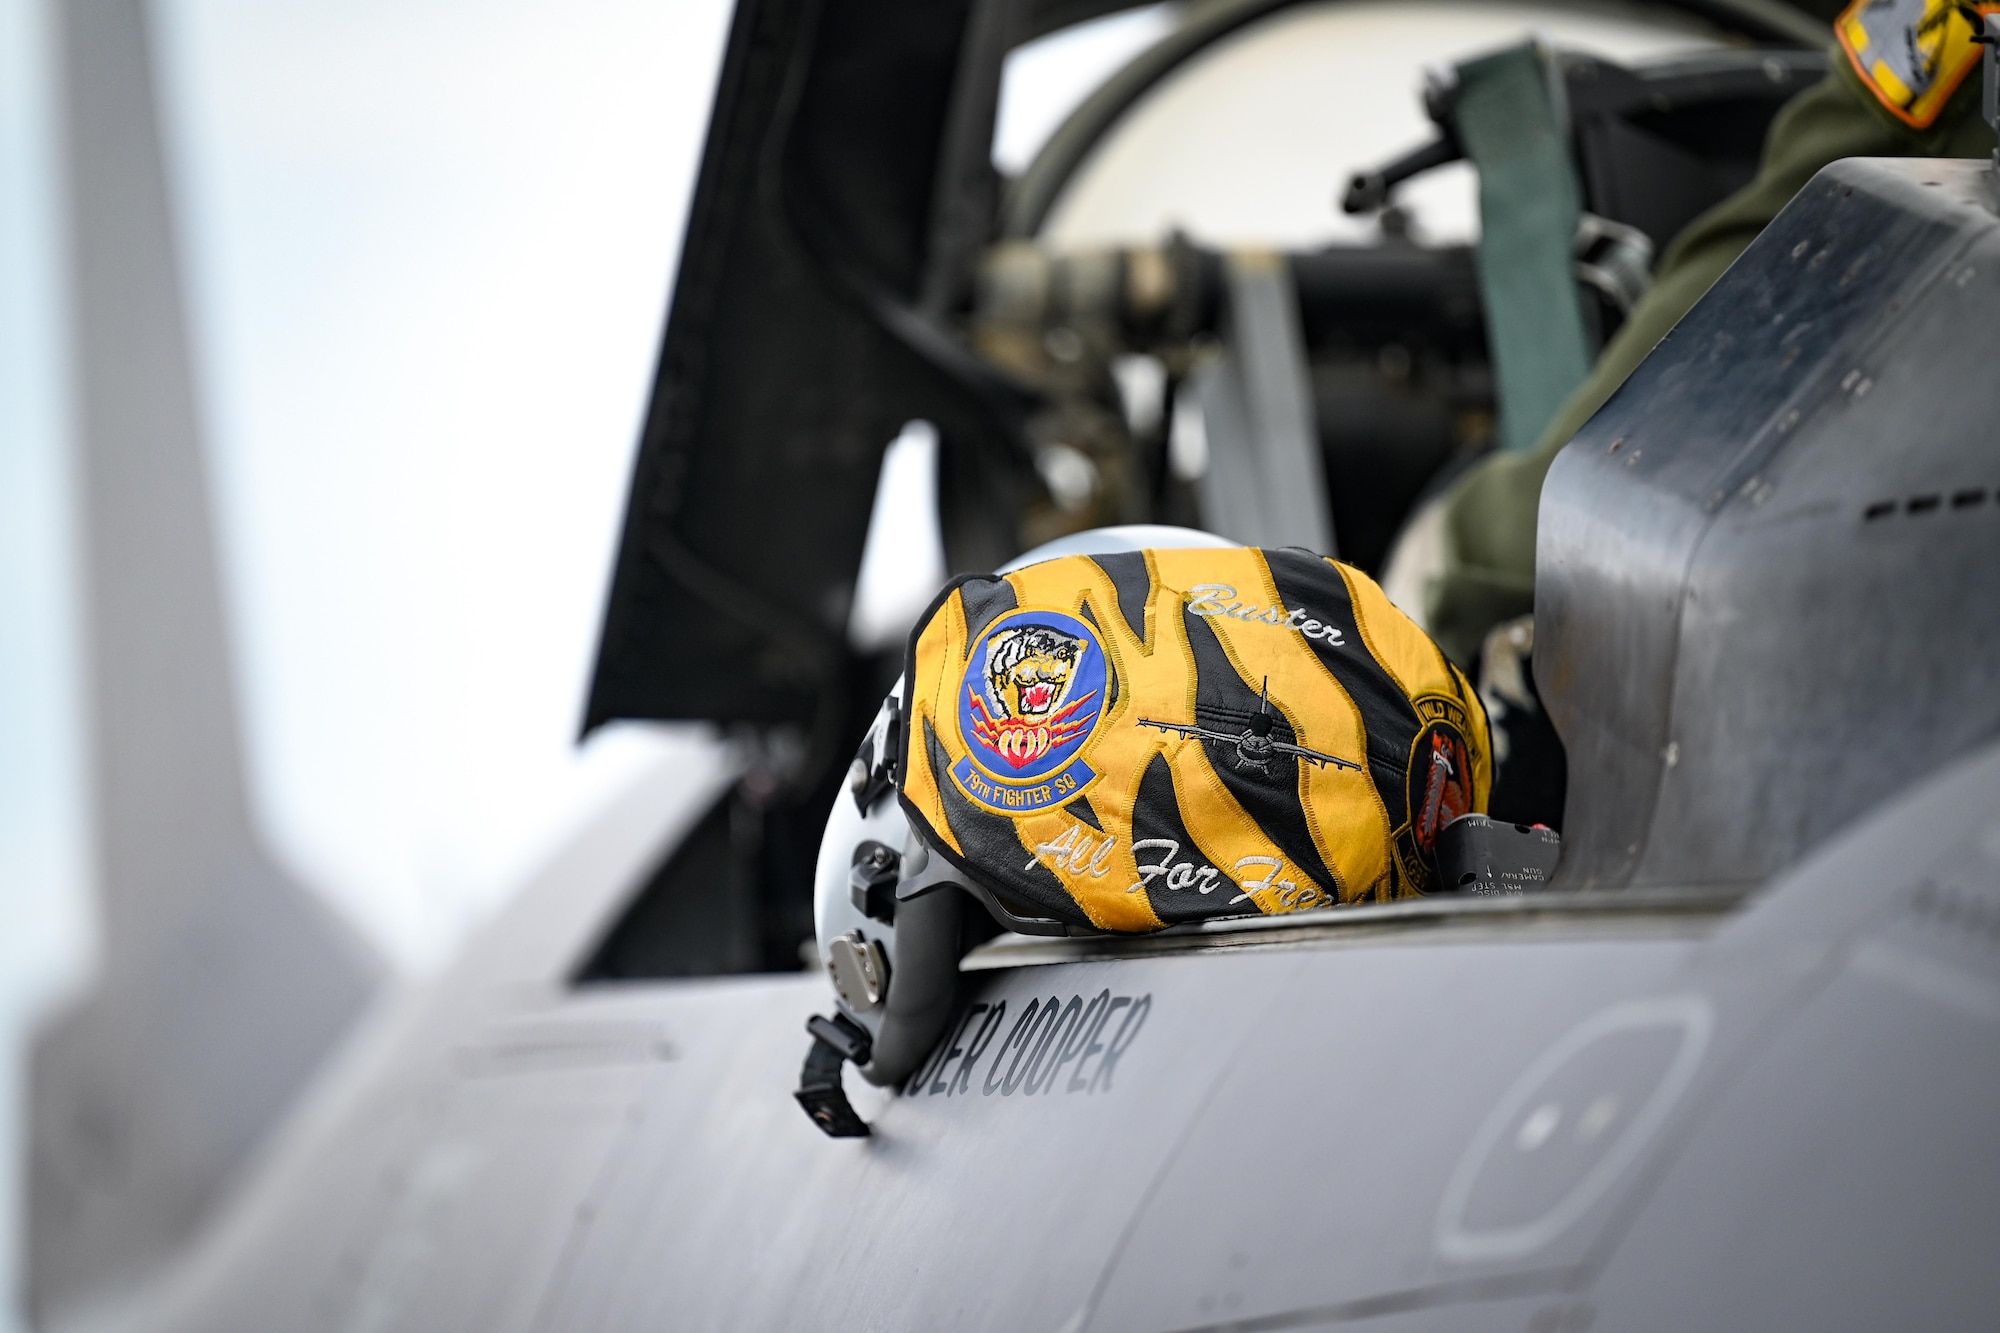 A pilot's helmet rests on the side of an aircraft.